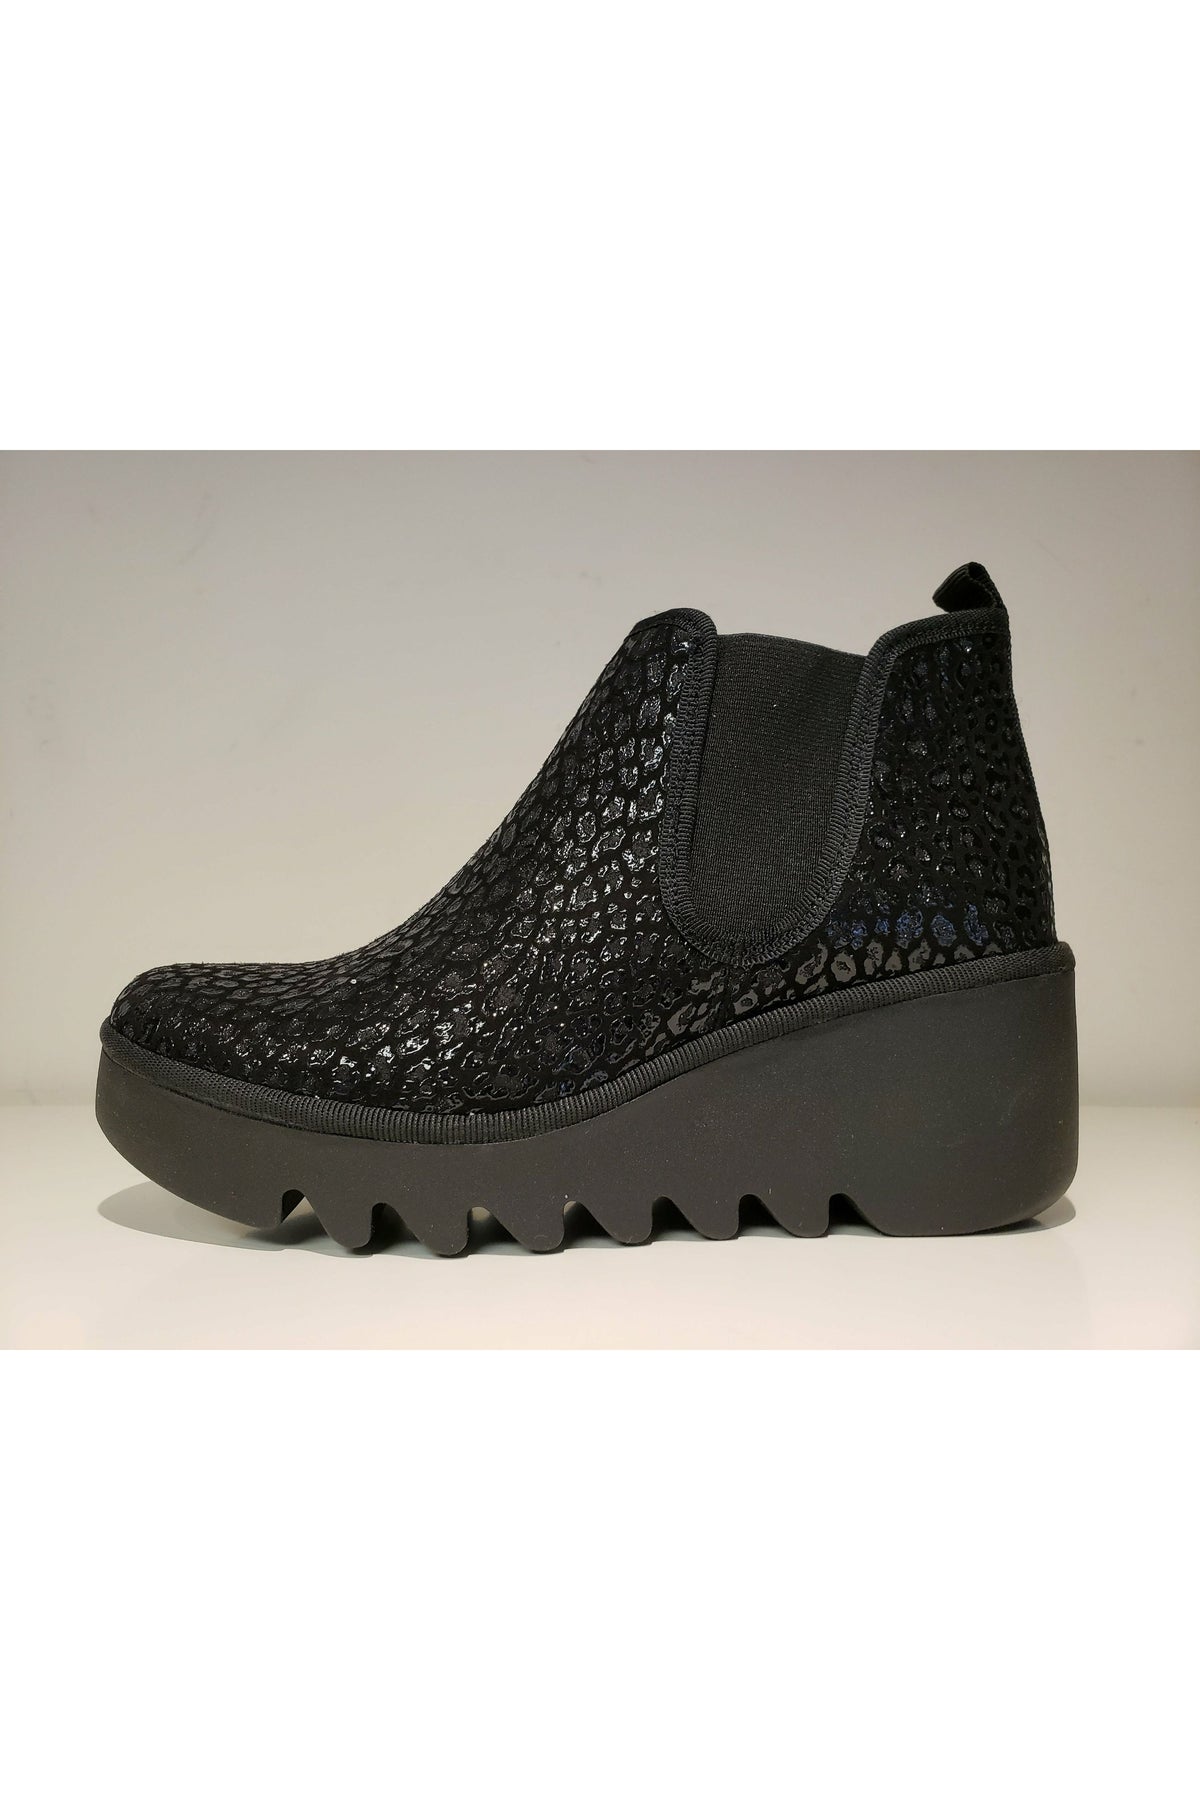 Fly London Ankle Boots - Style Byne, outside